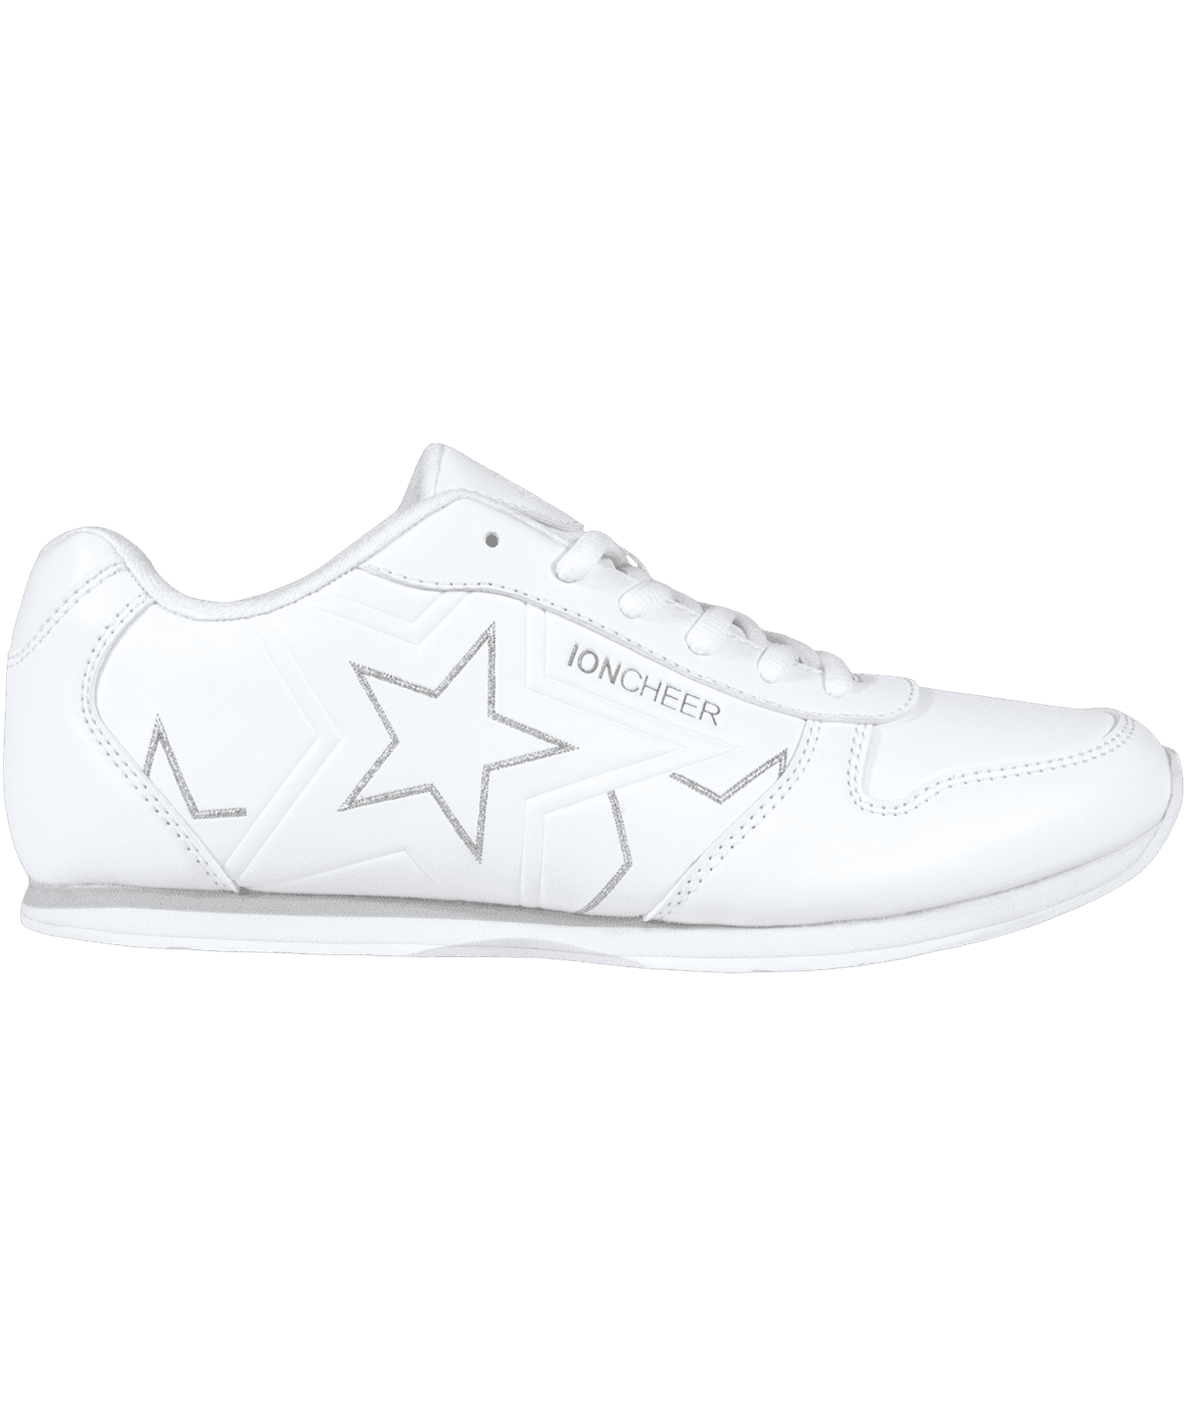 ION Cheer Action Shoes White Cheerleading Shoes